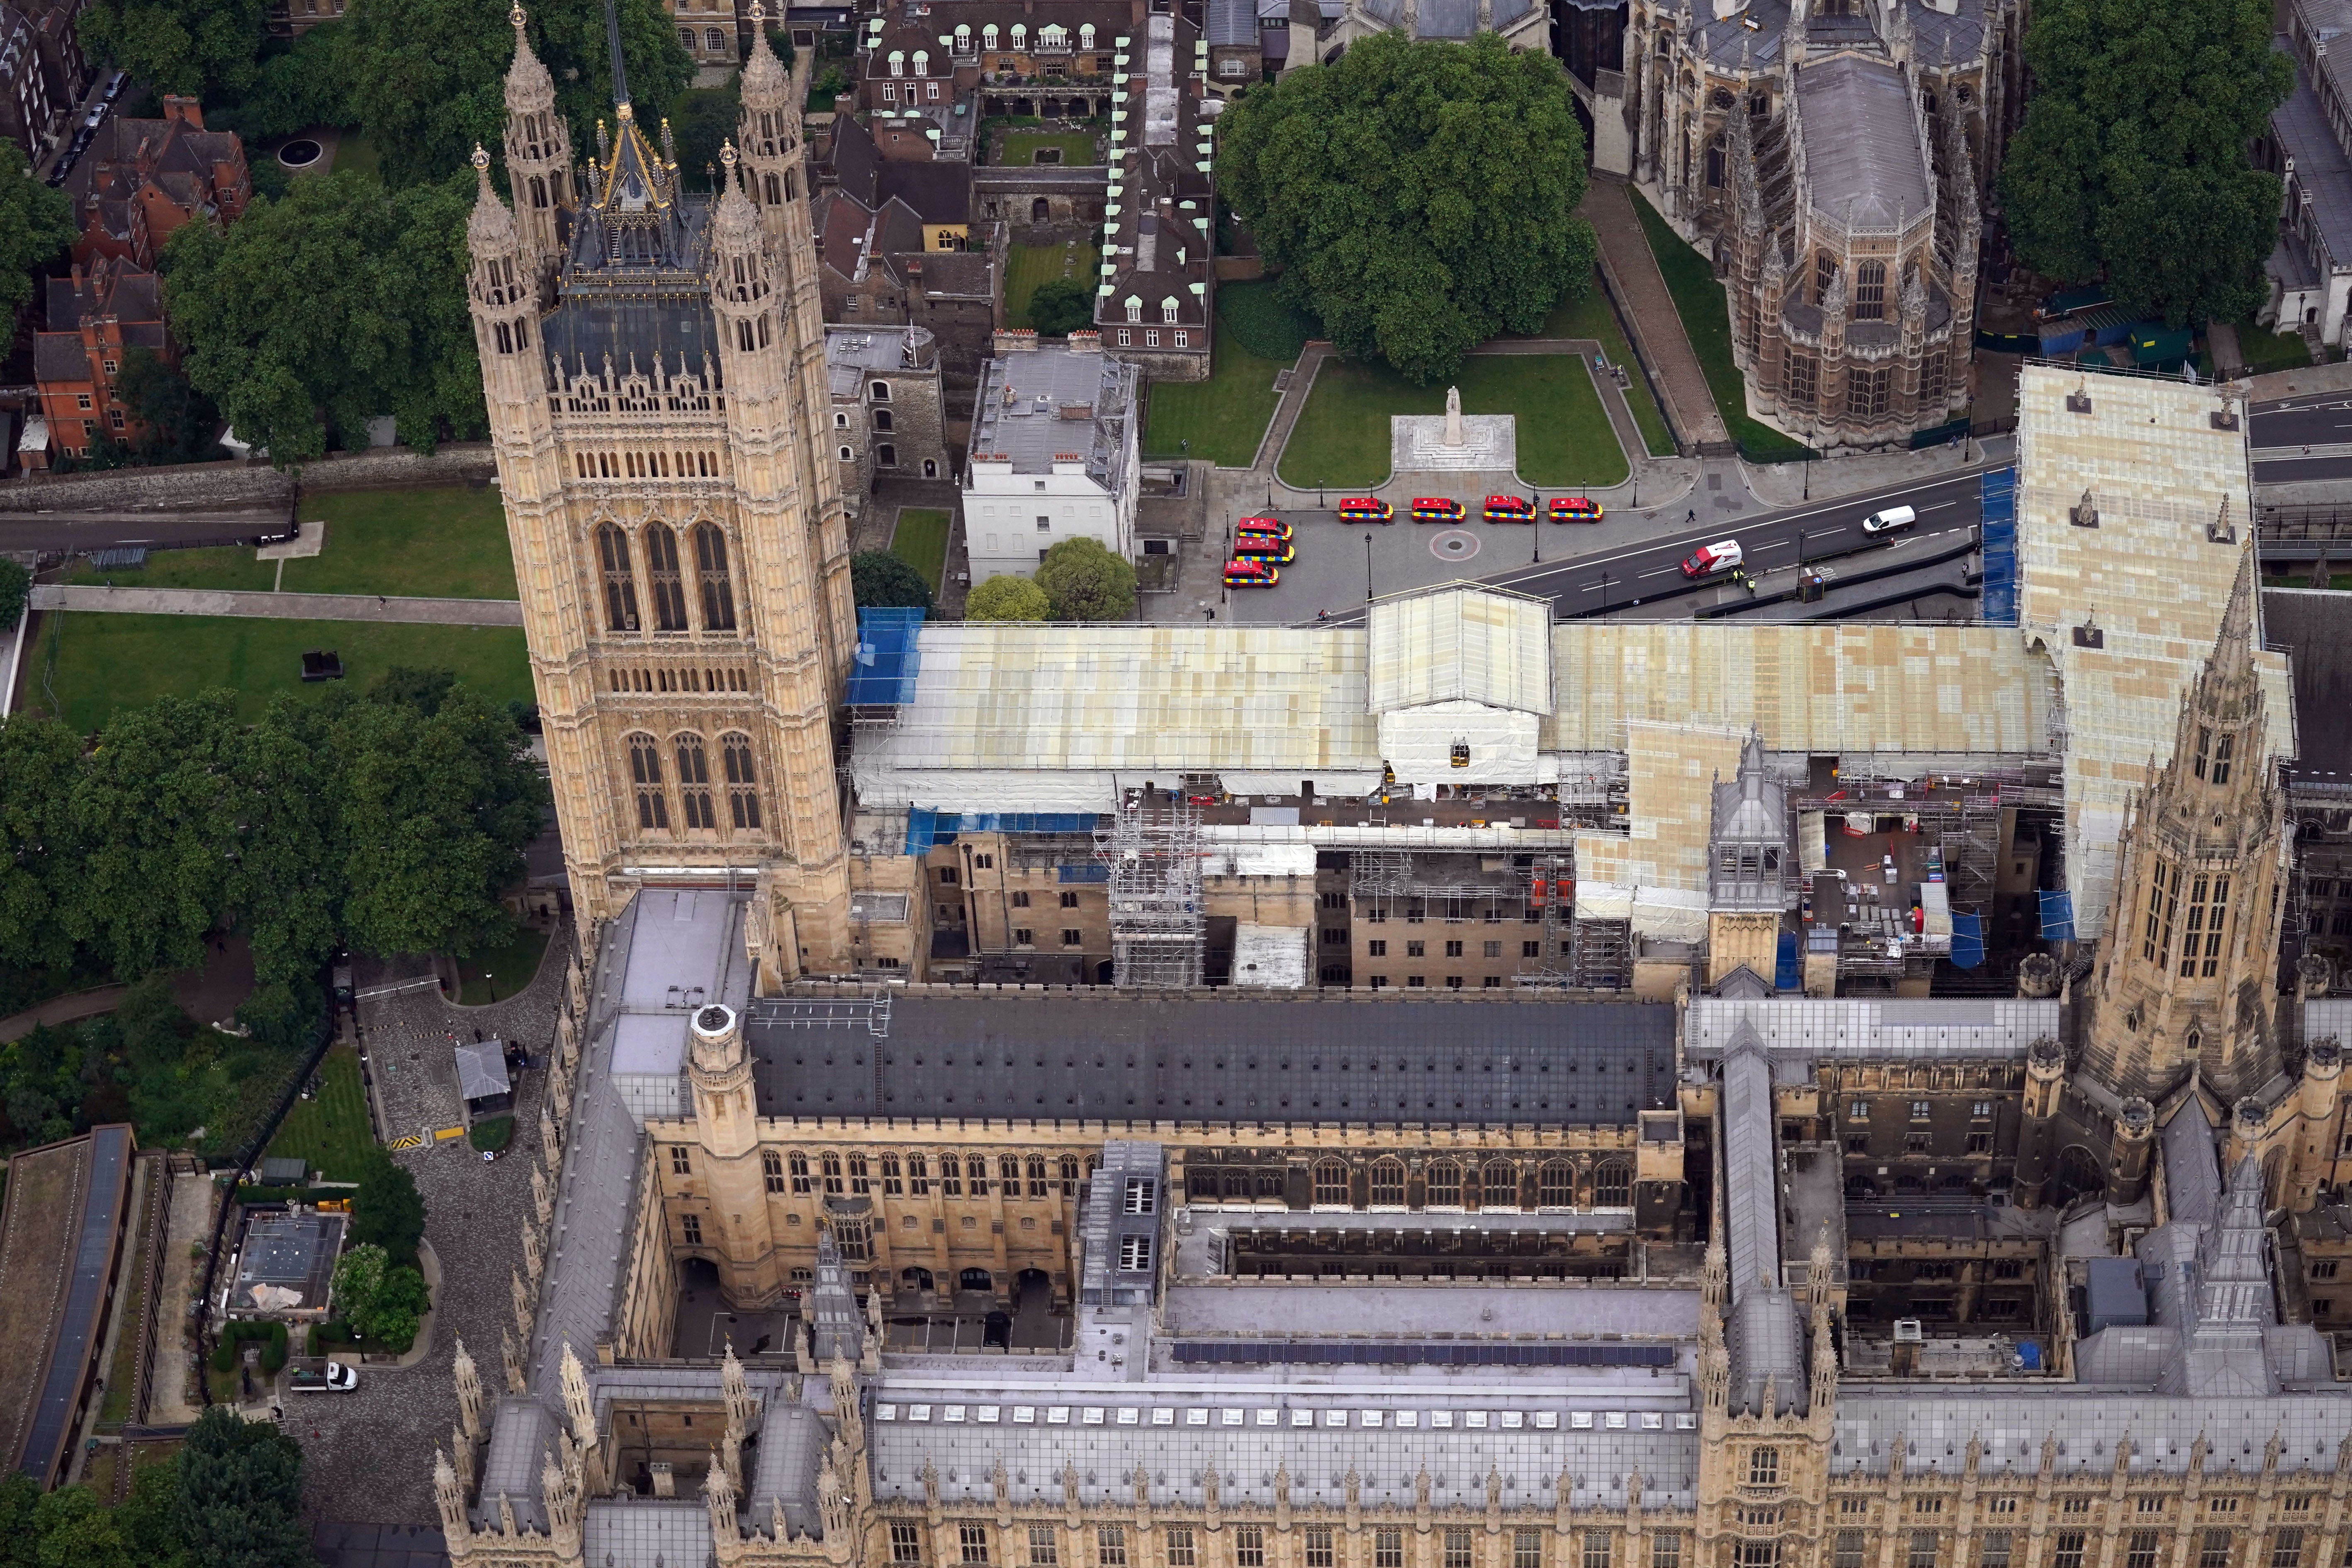 An aerial view of the Palace of Westminster in central London